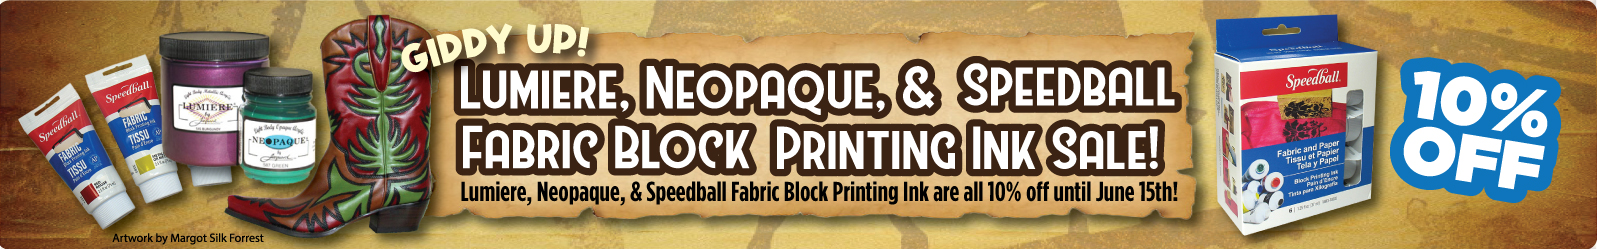 Lumiere, Neopaque, and Speedball Fabric Block Printing Ink Sale!